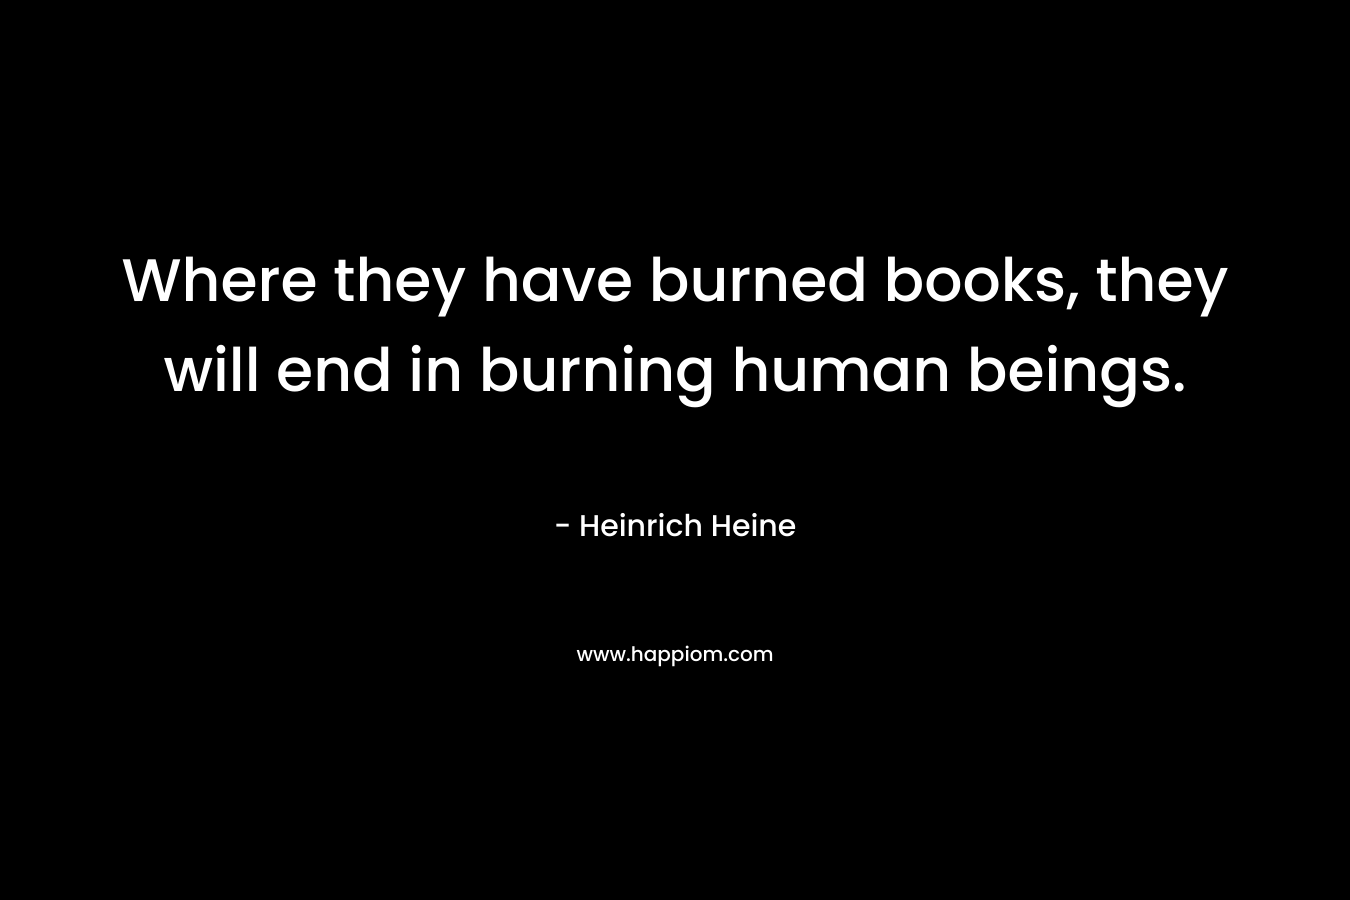 Where they have burned books, they will end in burning human beings.